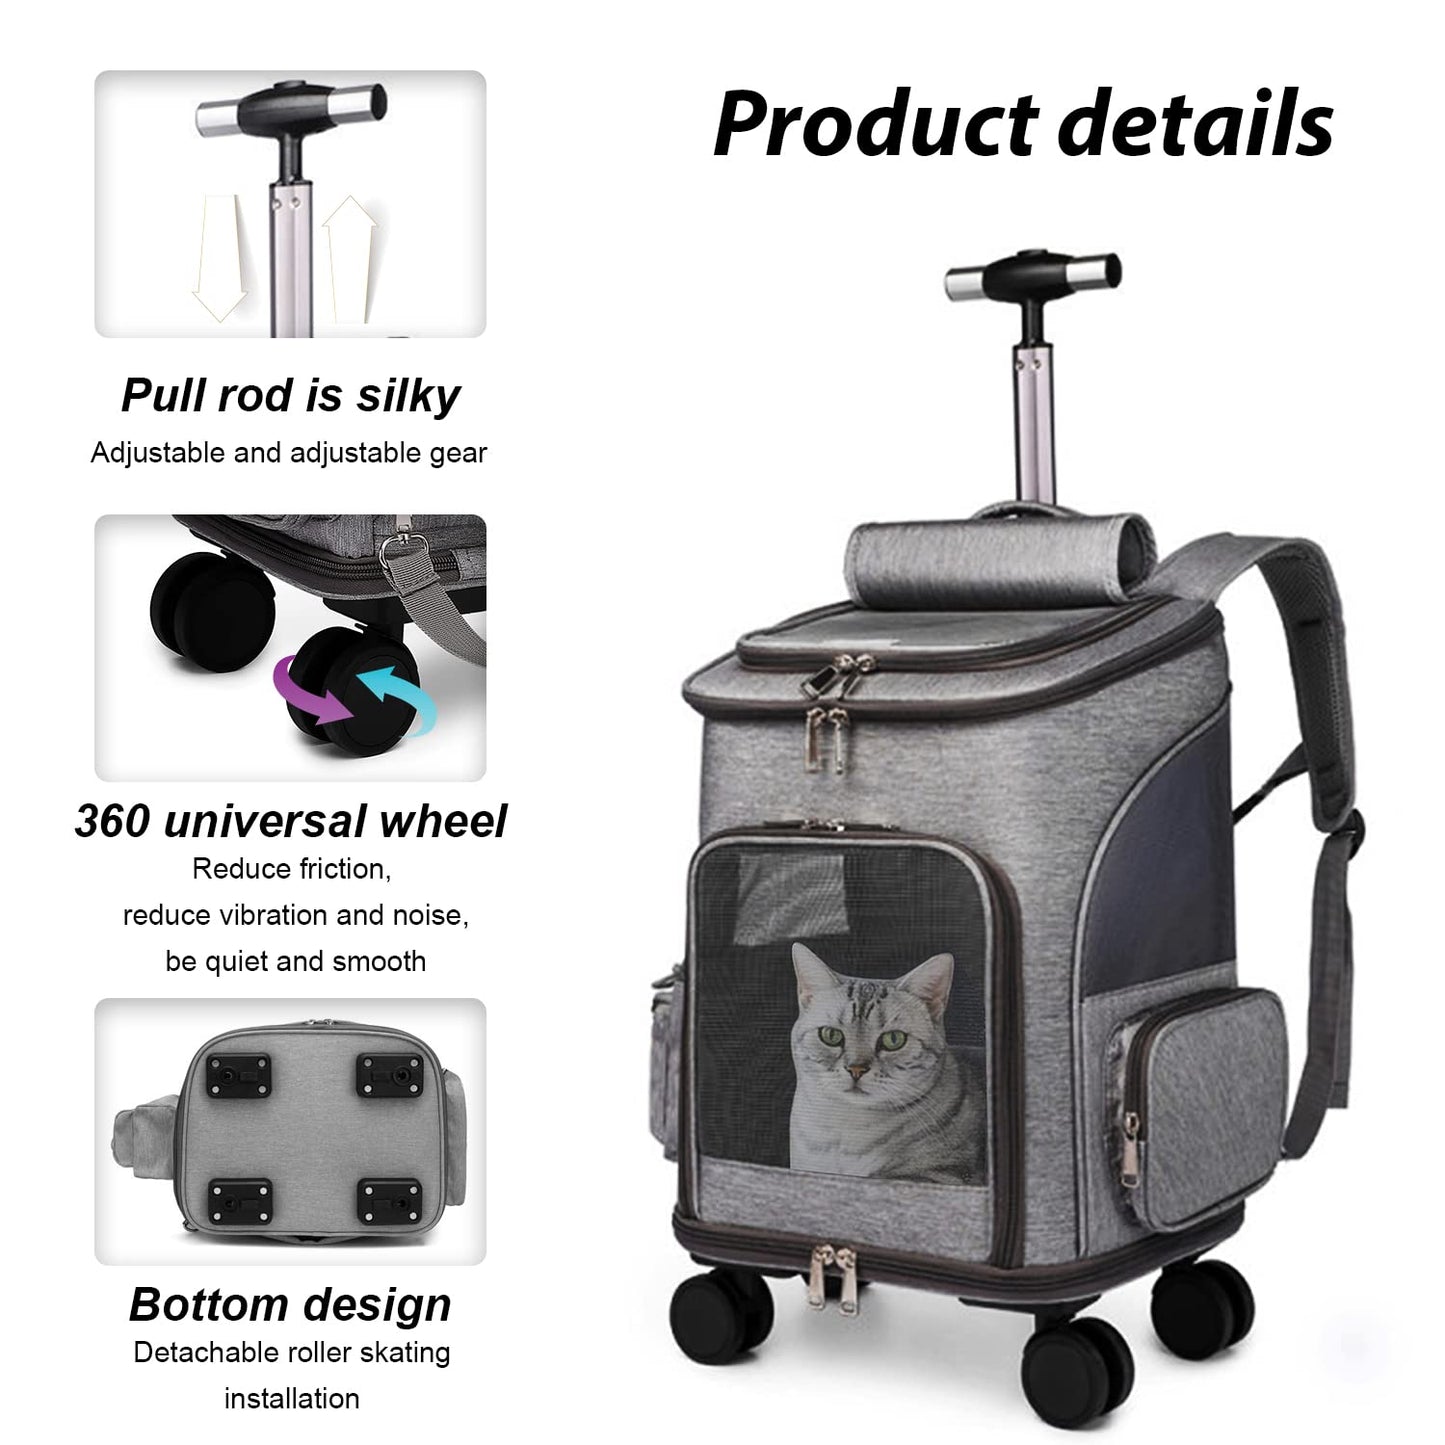 ELEGX Large Space Rolling Backpack Southwest,Delta Airline Approve for Pets with Detachable Wheels,Collapsible,Breathable Mesh with Cup Holder, Easy to Handle, Spacious for Traveling & Vet Appointment